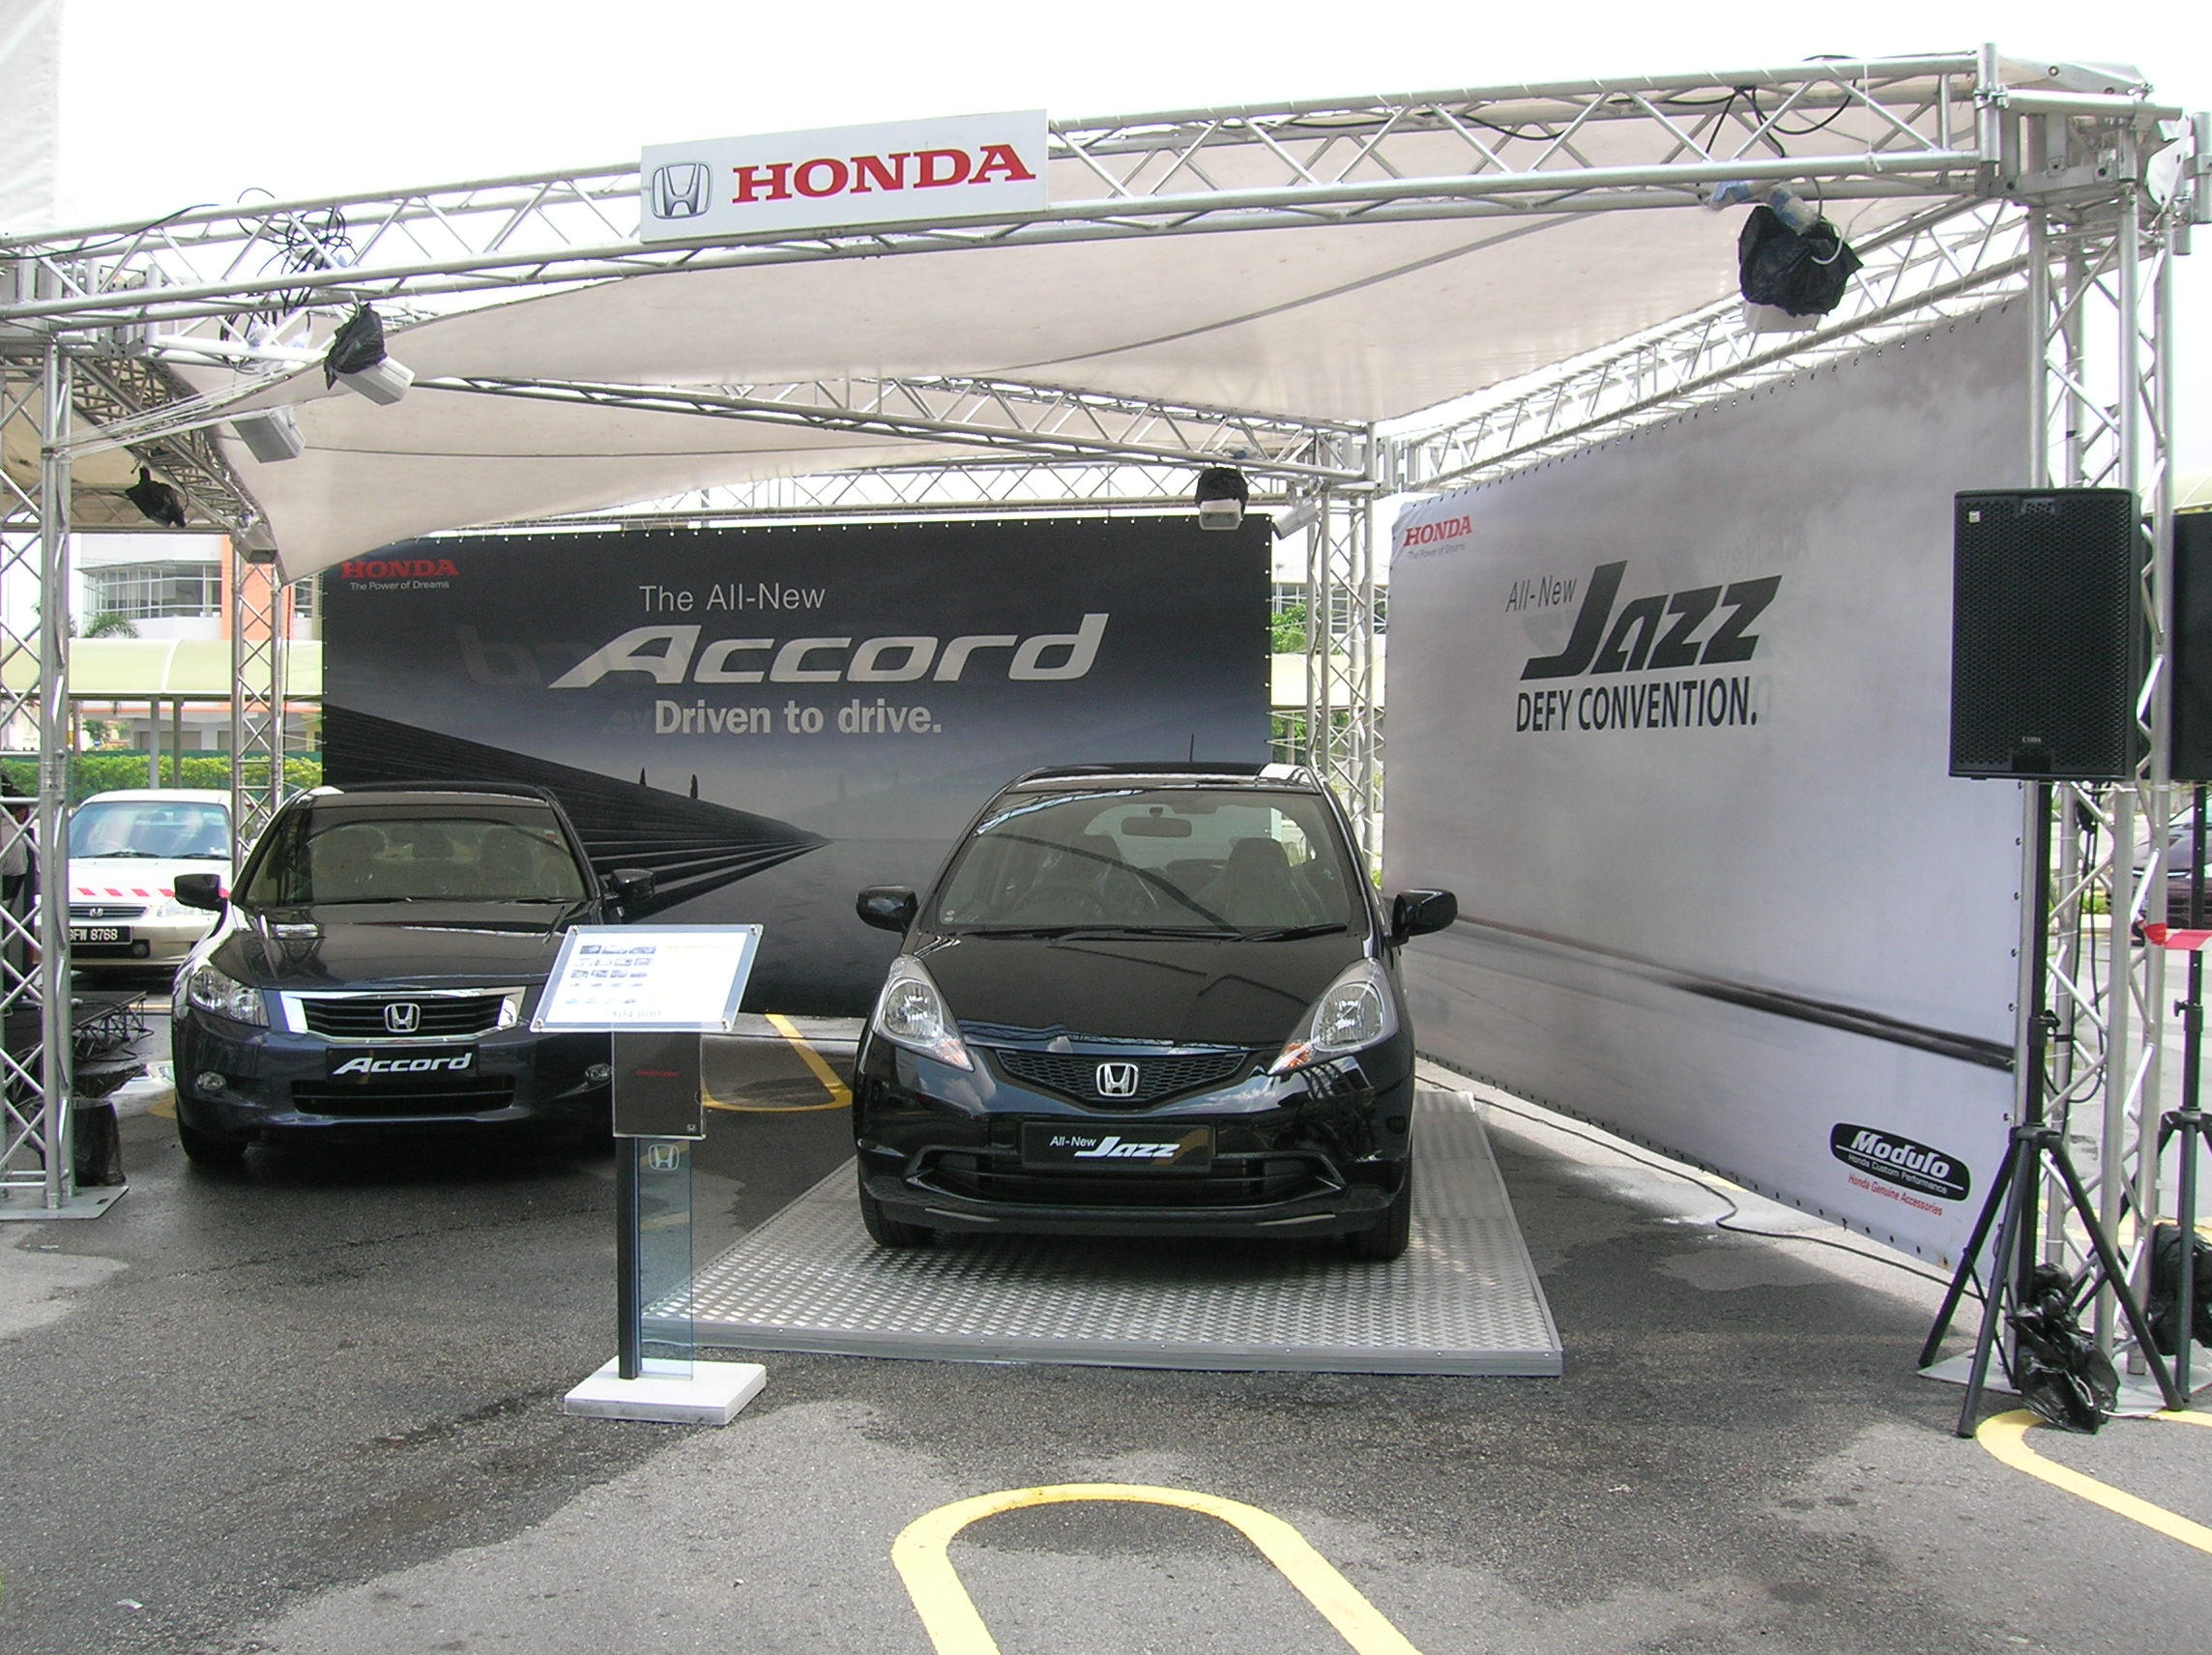 Accord and Jazz on display